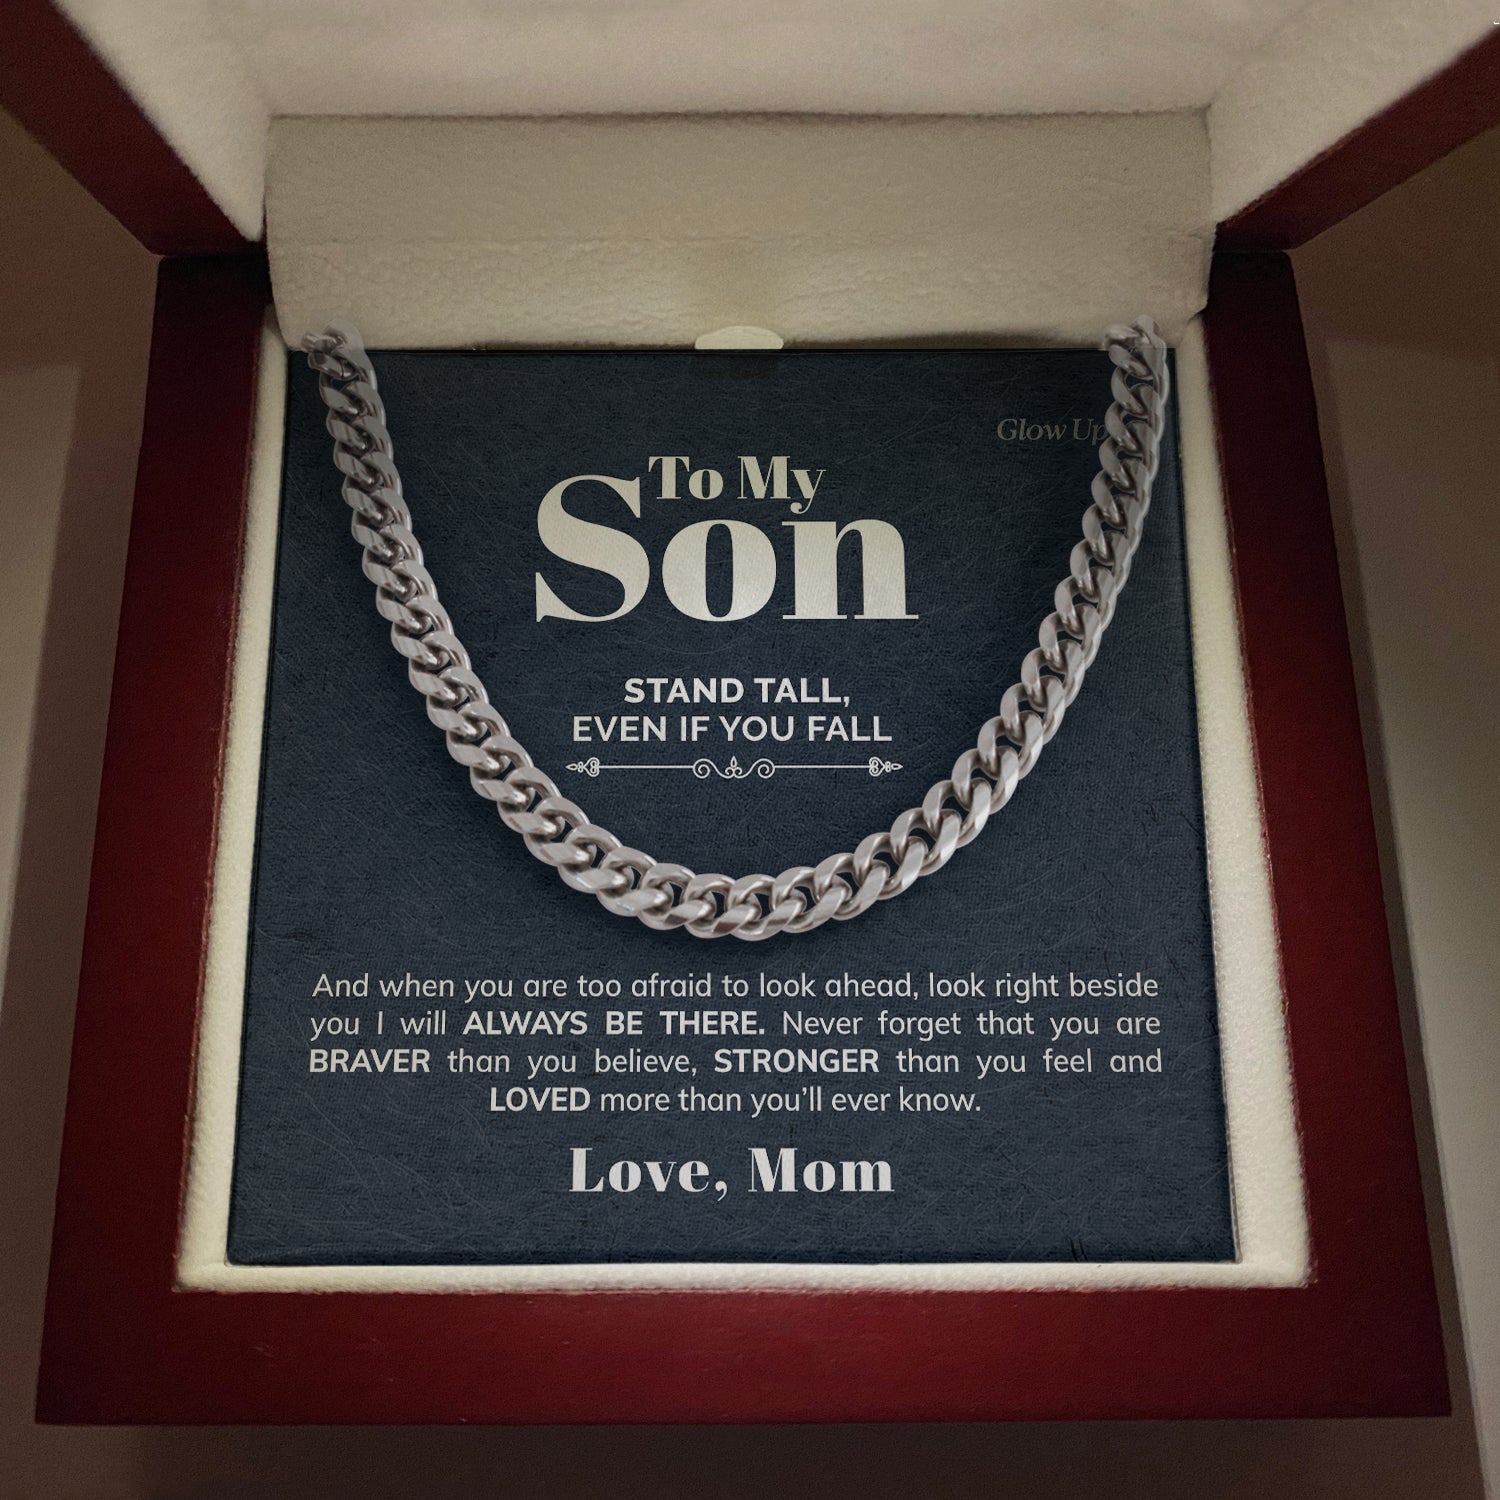 ShineOn Fulfillment Jewelry 316L Stainless Steel / Luxury LED Box To My Son - Stronger than you feel - Cuban Link Chain Necklace